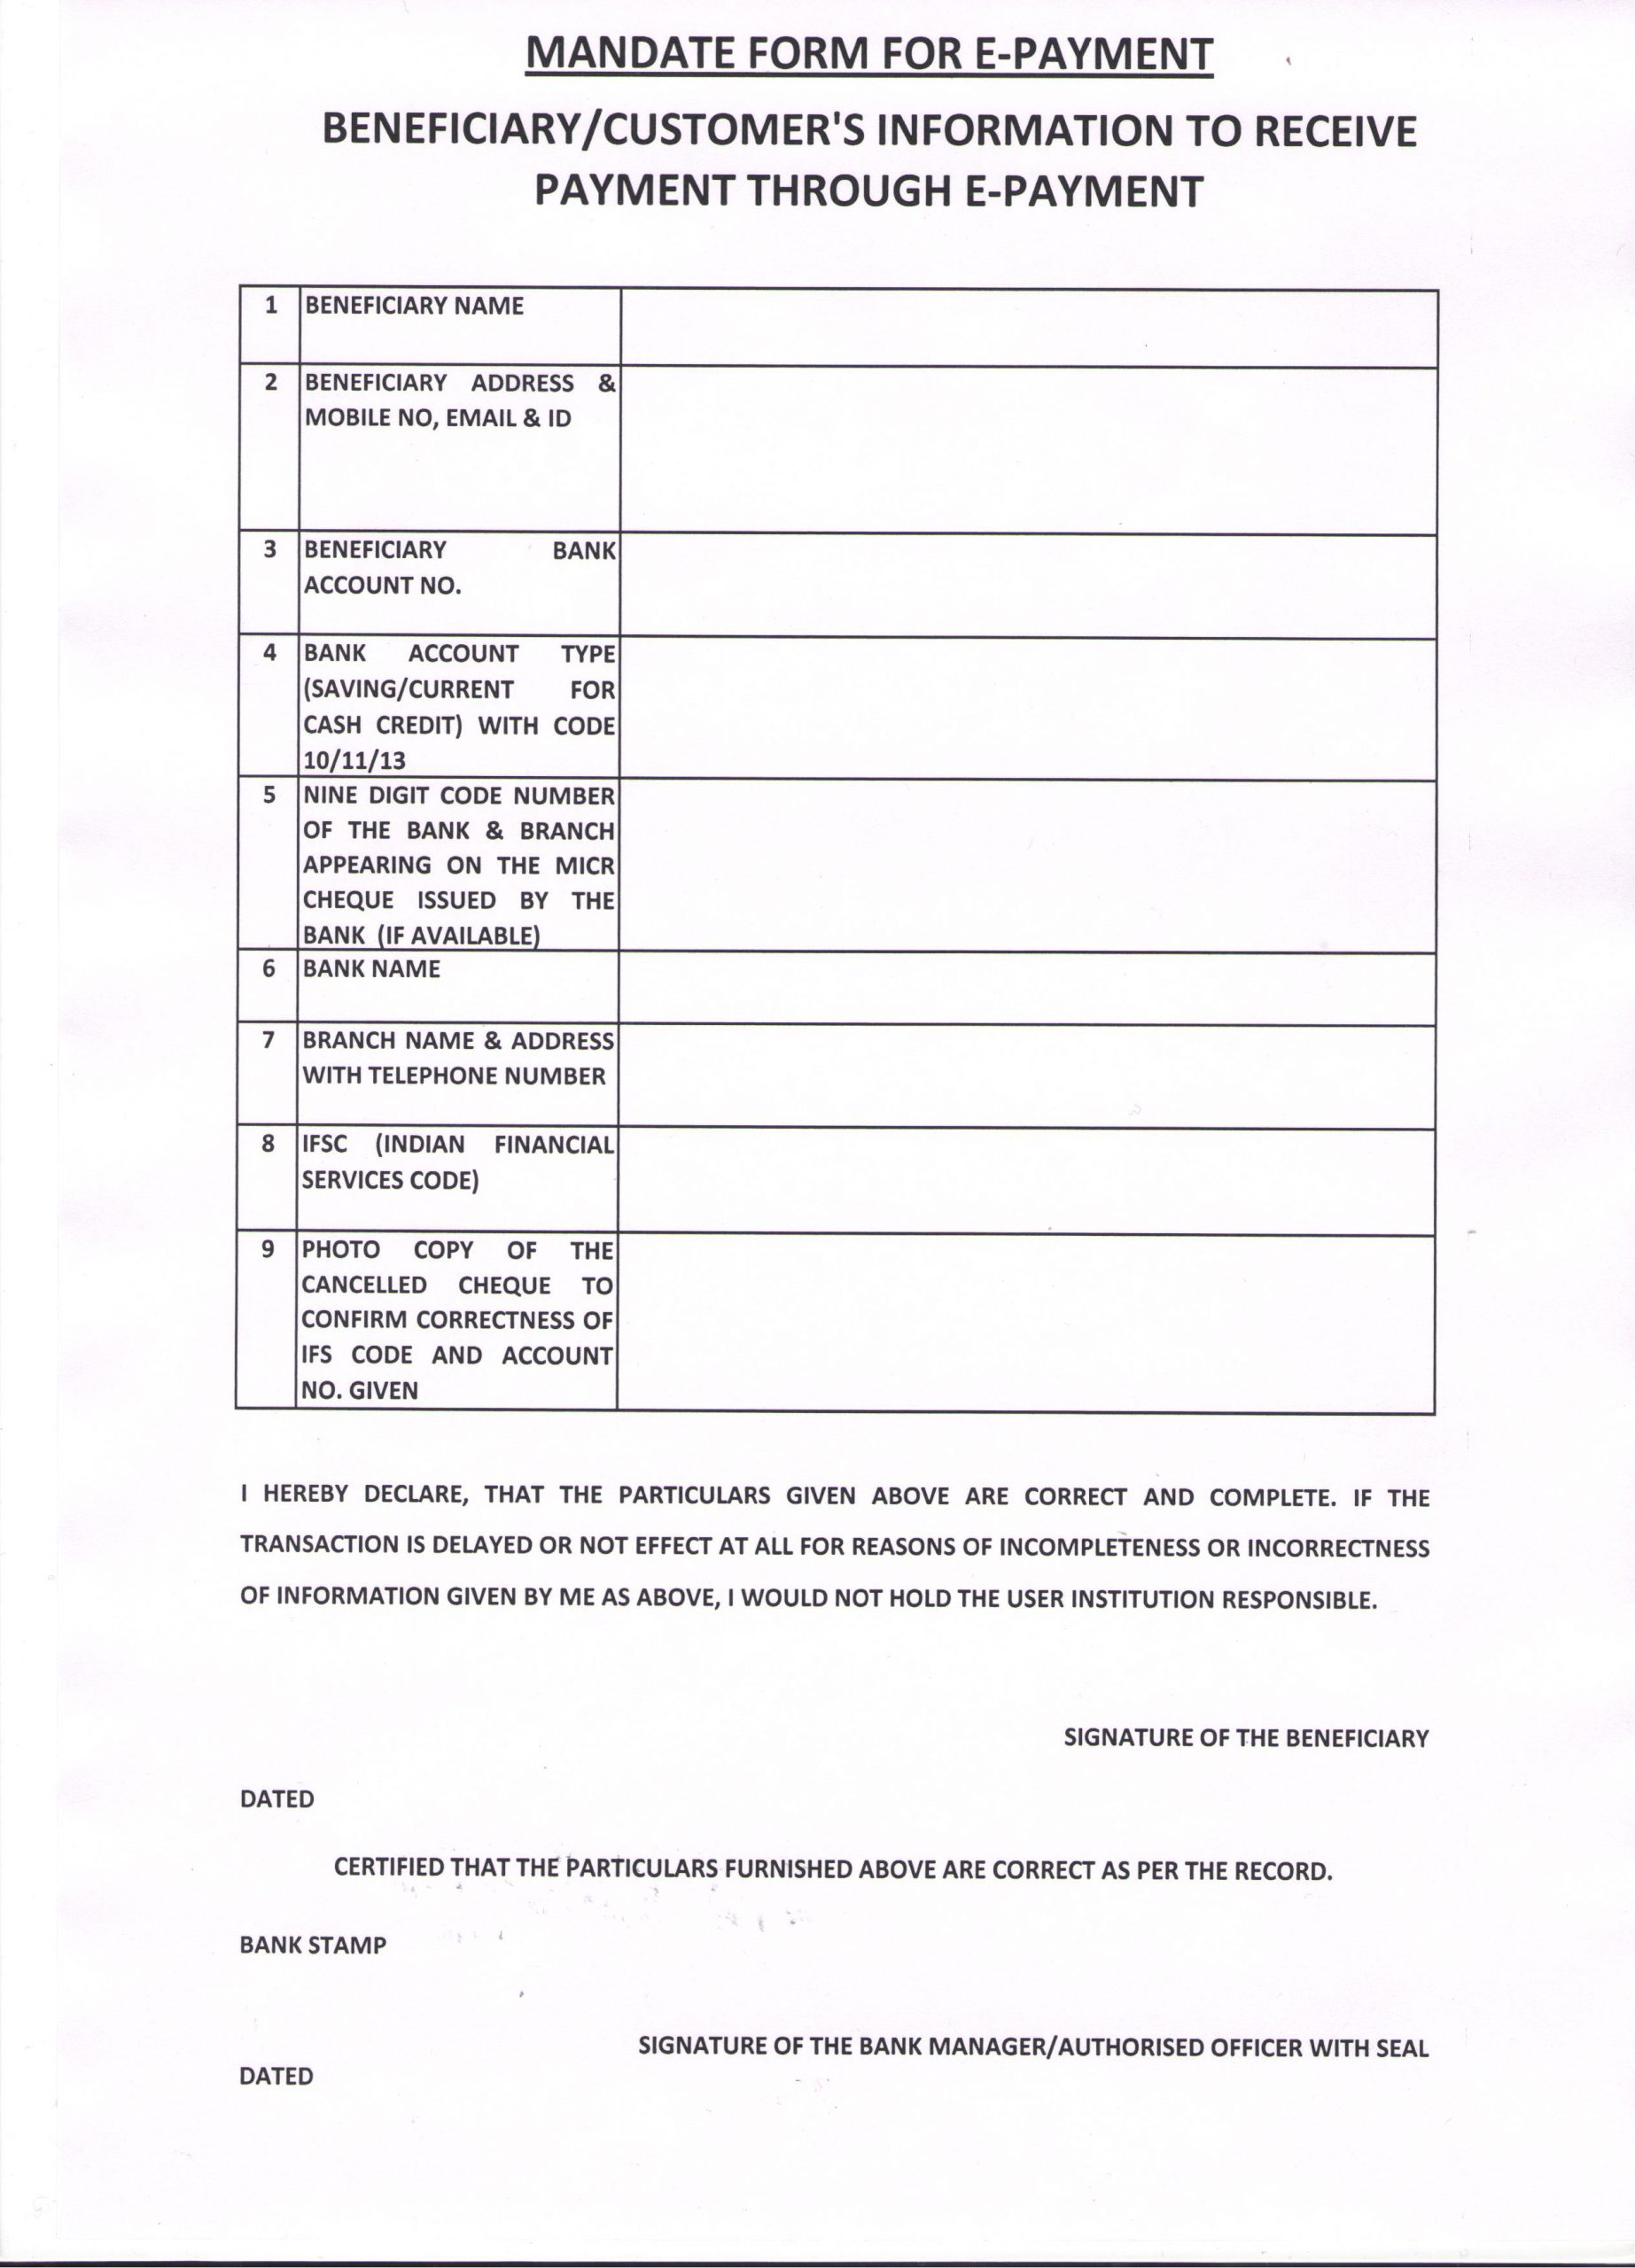 Car Insurance Policy Car Insurance Policy Transfer Letter intended for size 2528 X 3507